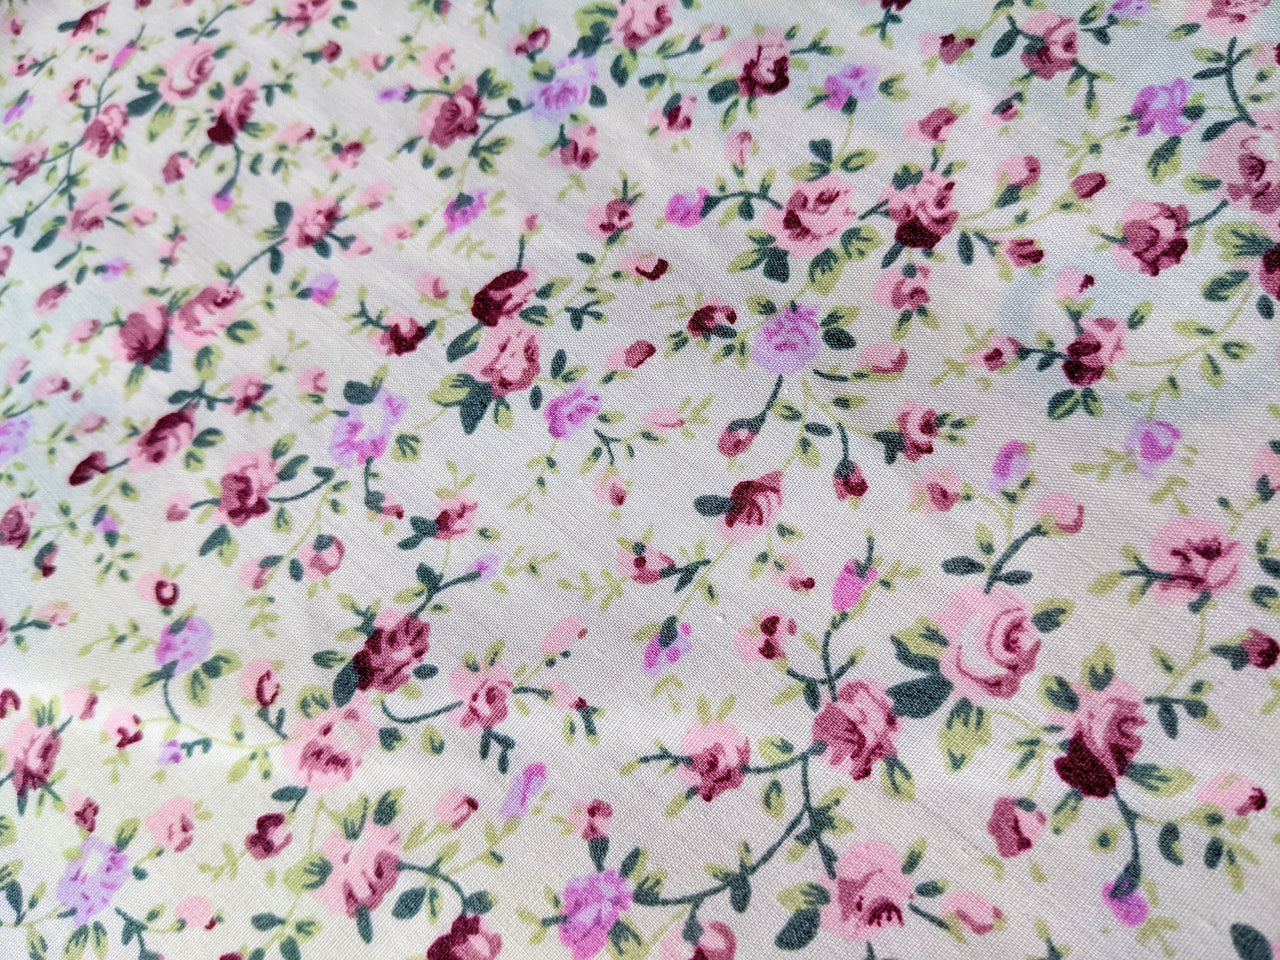 Pink Poly Cotton Rose Fabric, Floral Fabric, Small Print Fabric